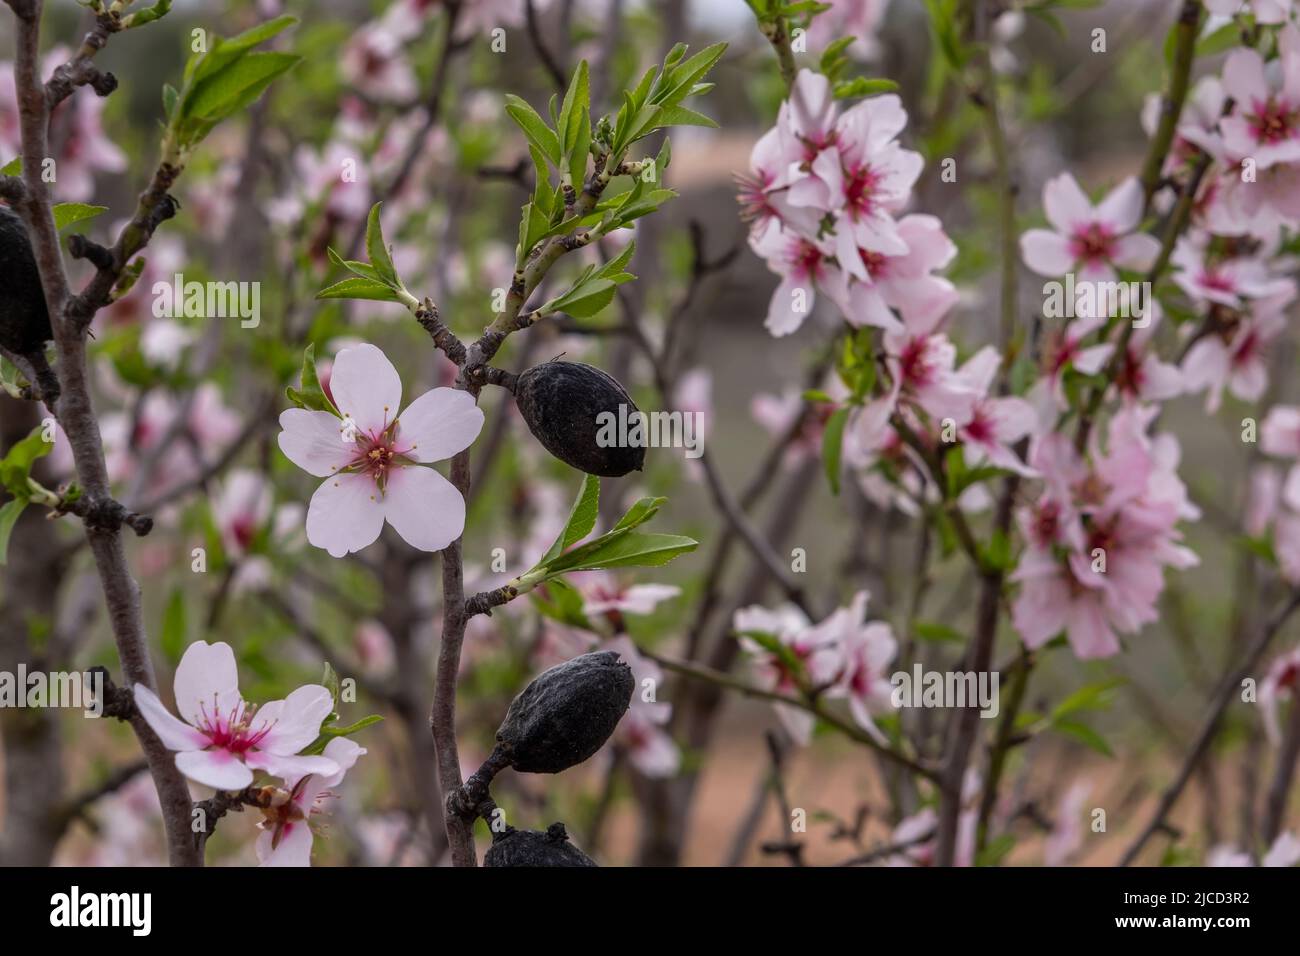 Detail of blossoming almond tree (Prunus dulcis) pink flowers and drupes Stock Photo